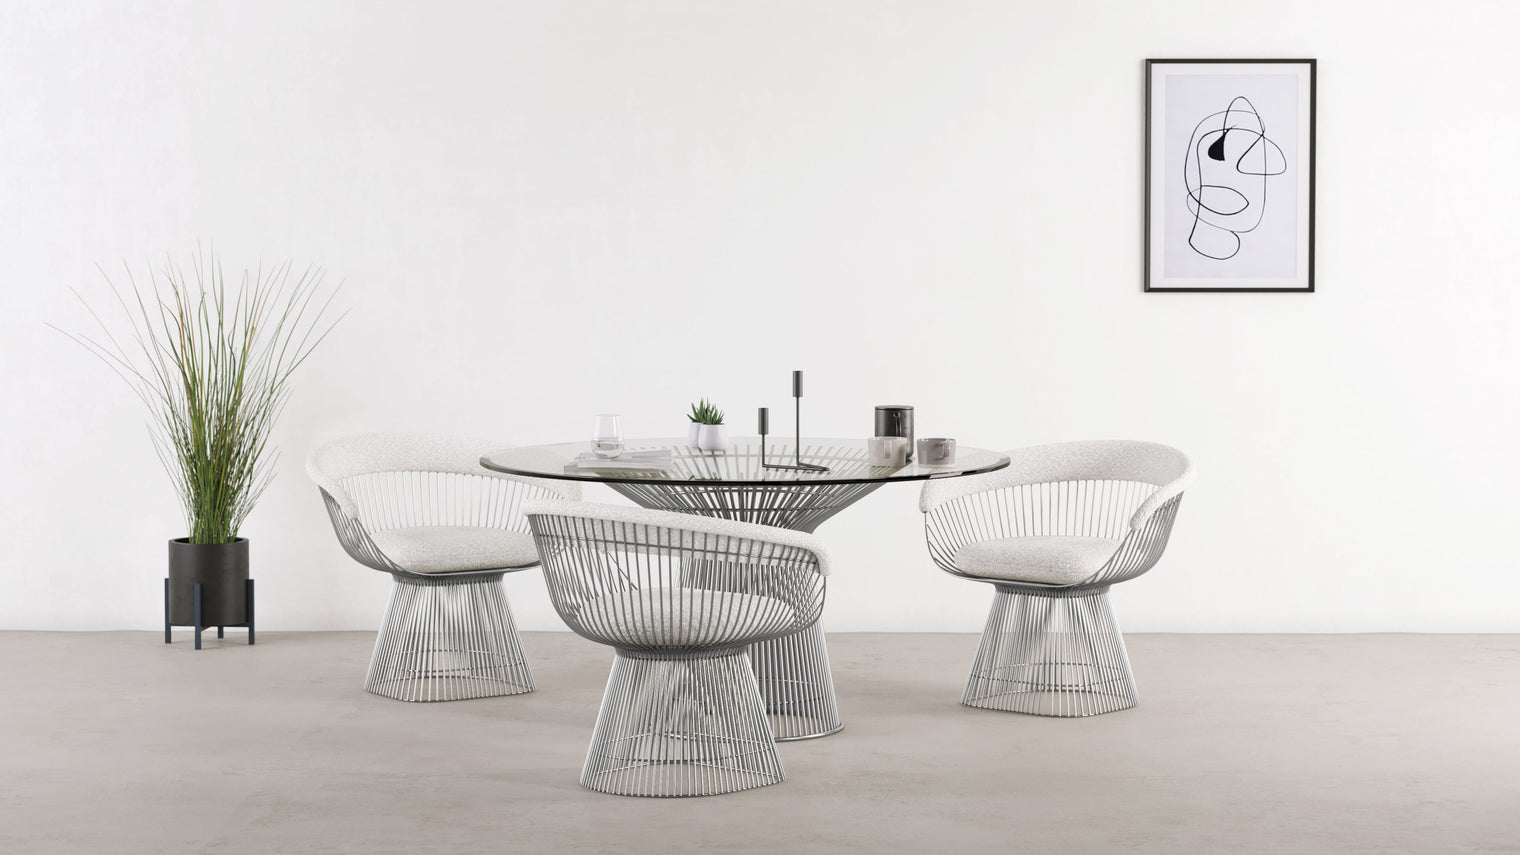 Minimalism meets industrial flair|Inspired by American architect and interior designer Platner, this revolutionary chair is a modern marvel. The meticulously constructed seating solution appeals to the minimalist at heart, but the industrial vibe it portrays is undeniable. It’s the perfect fusion of form and function.
